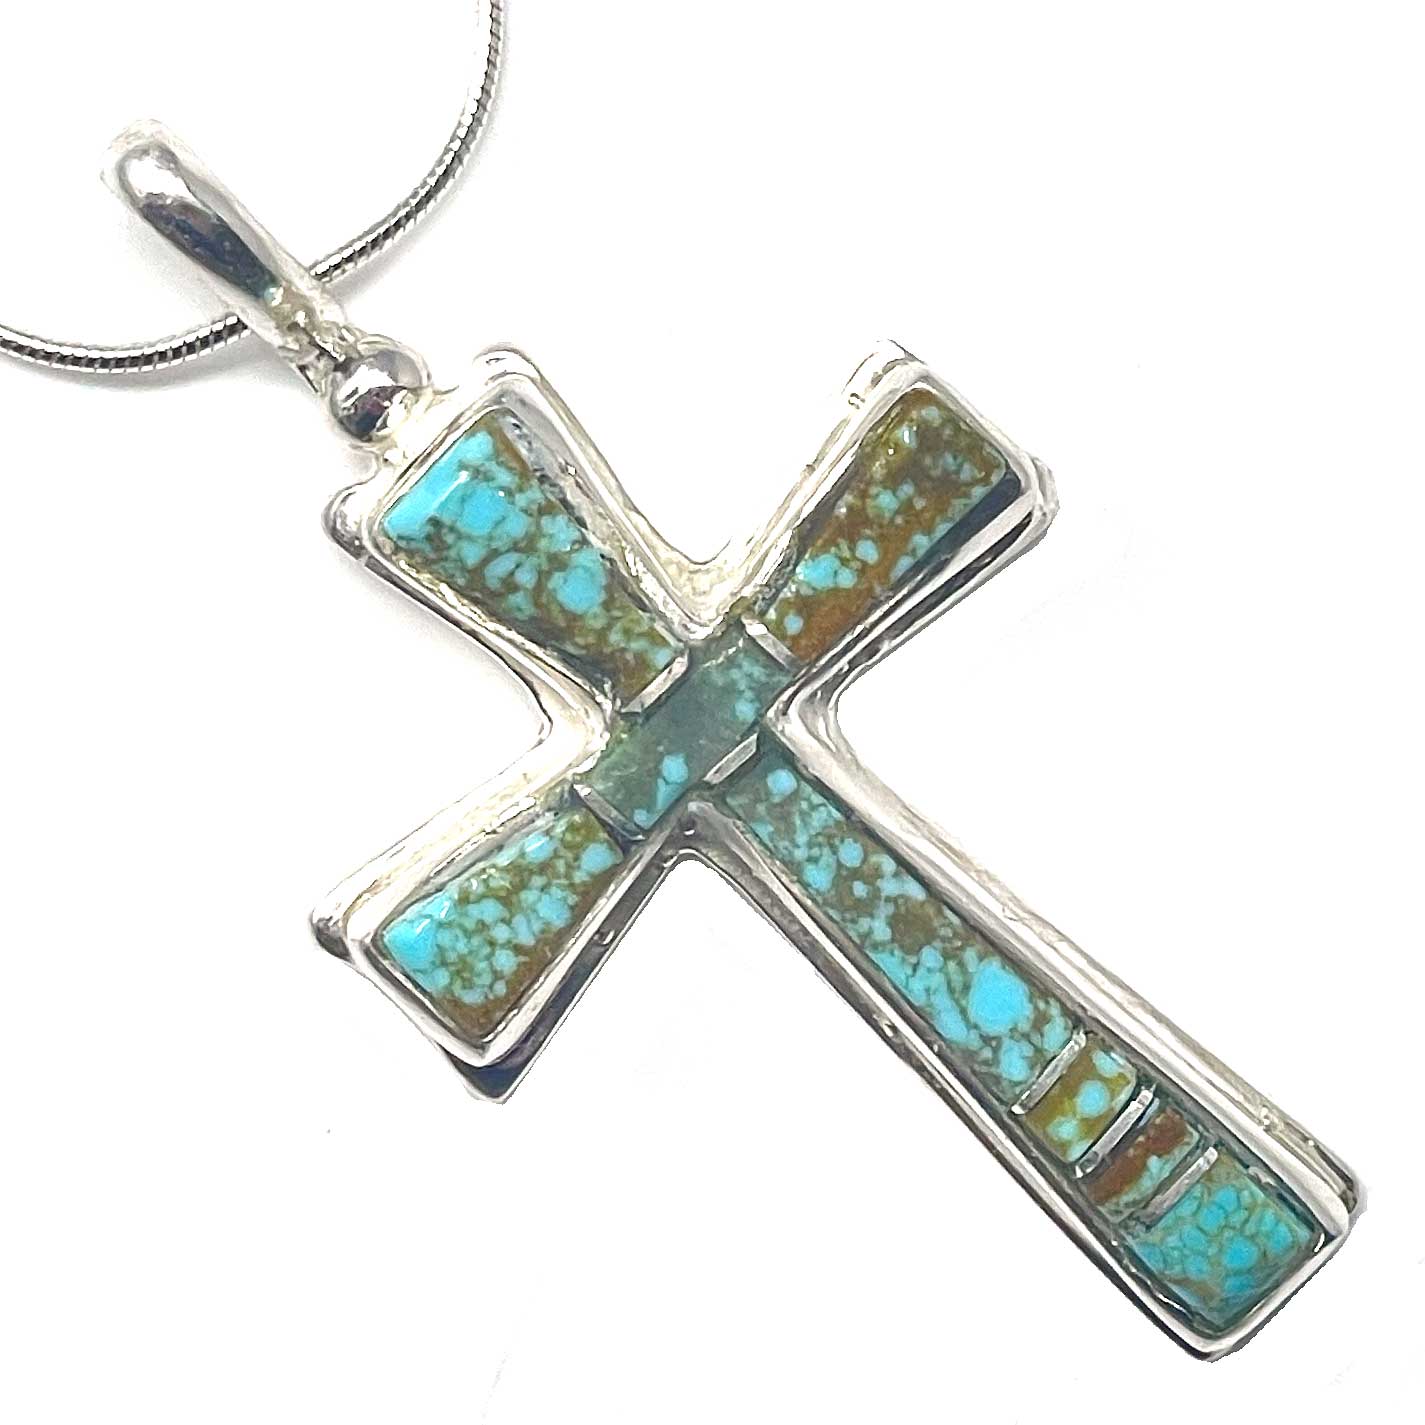 Cross Pendant Featuring Number 8 Turquoise